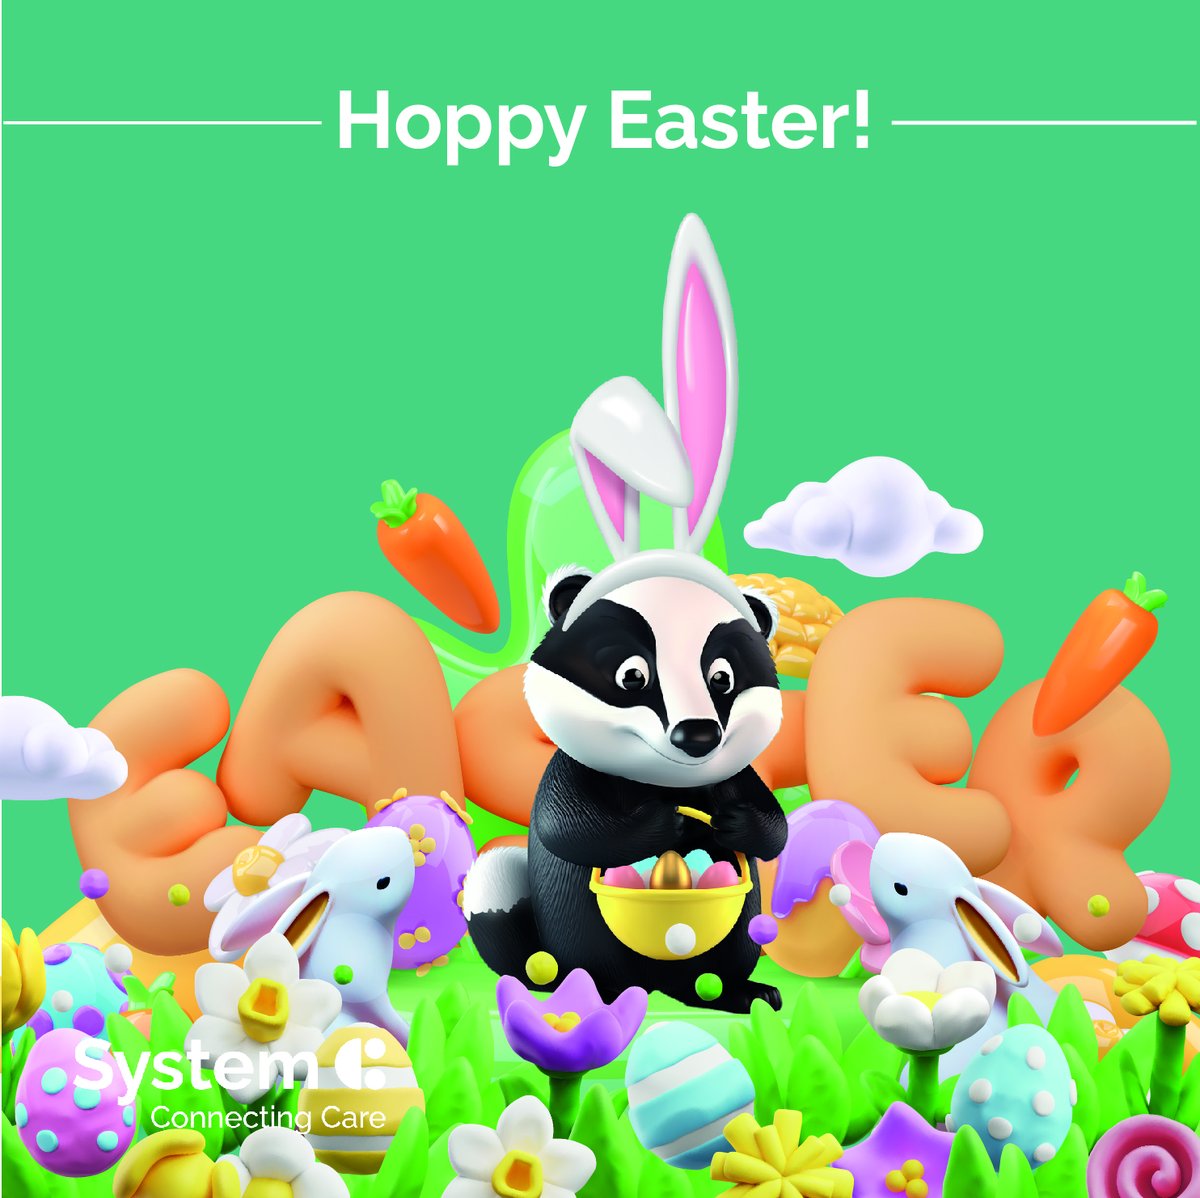 Hoppy Easter from all of the BadgerNet Team! 💛🐰 Show us some of your best Easter Eggs and Treats and we will rate them! 🍫 #Easter2024